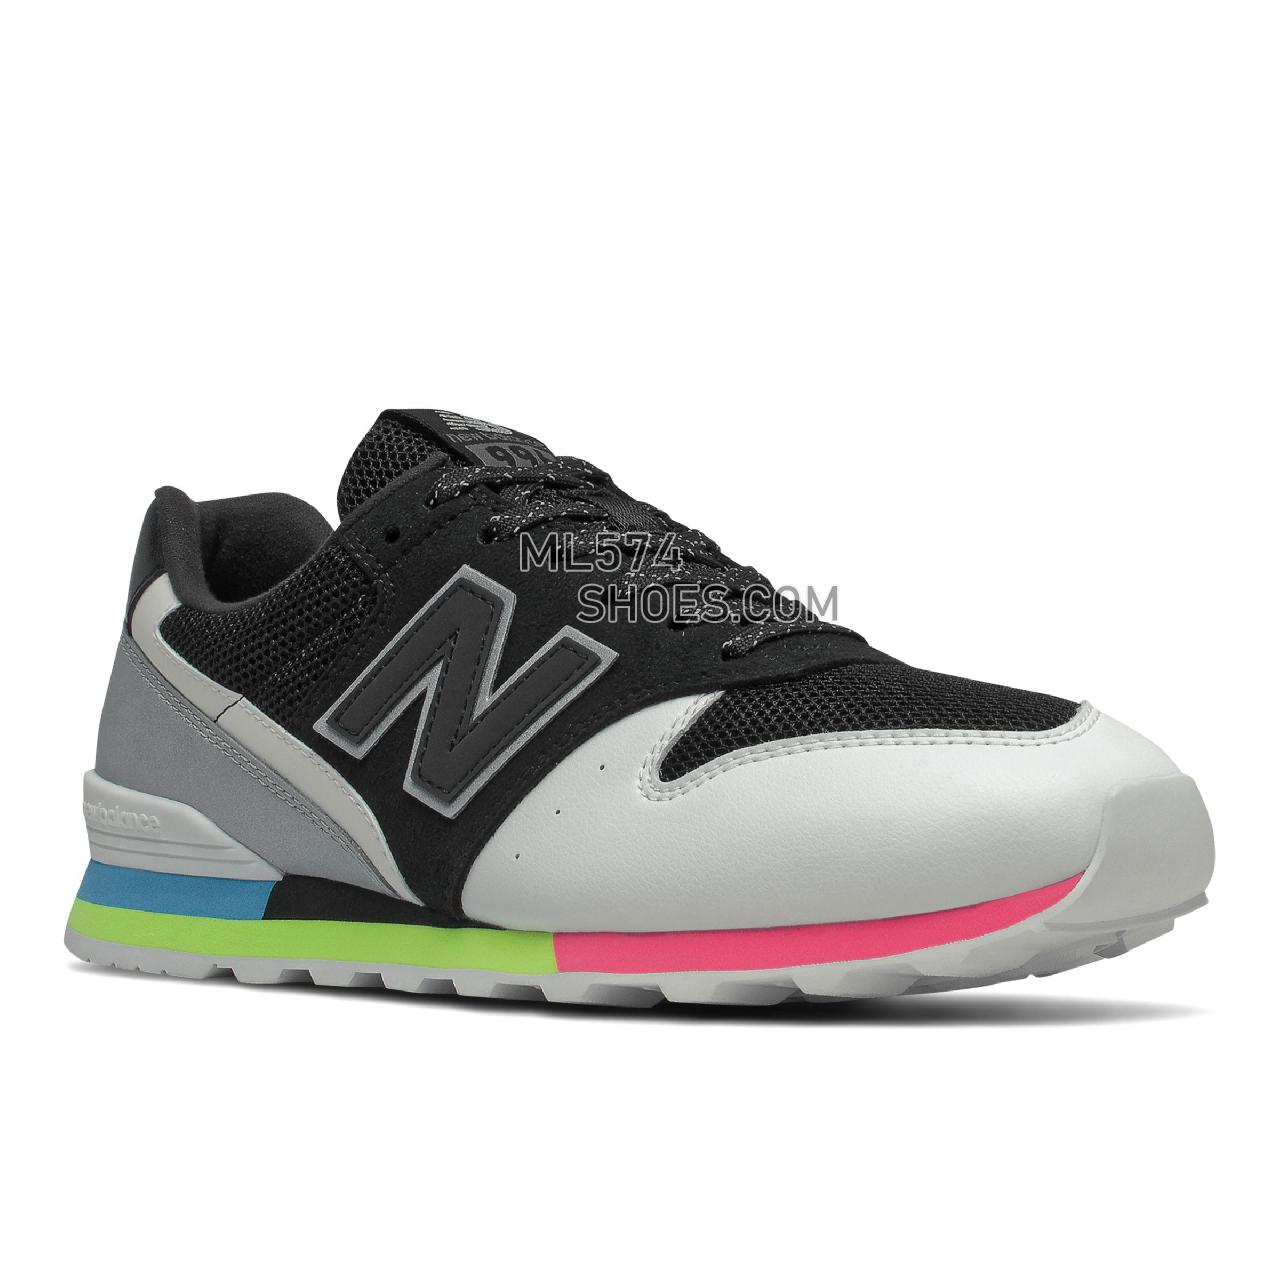 New Balance WL996v2 - Women's Classic Sneakers - Black with White - WL996PR2